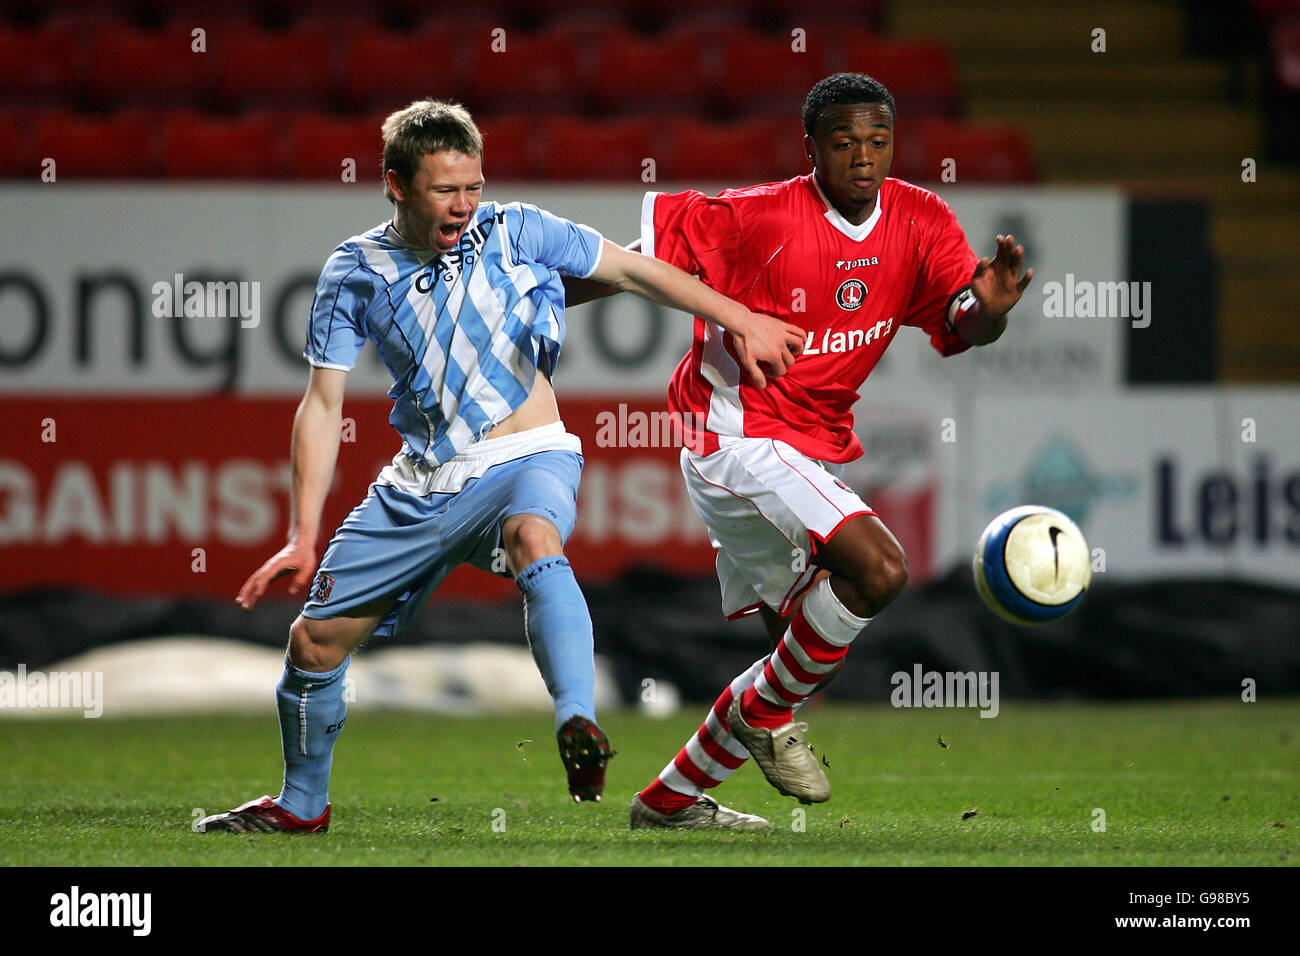 Charlton Athletic's Osei Sankofa (r) and Coventry City's Adam Layfield battle for the ball Stock Photo